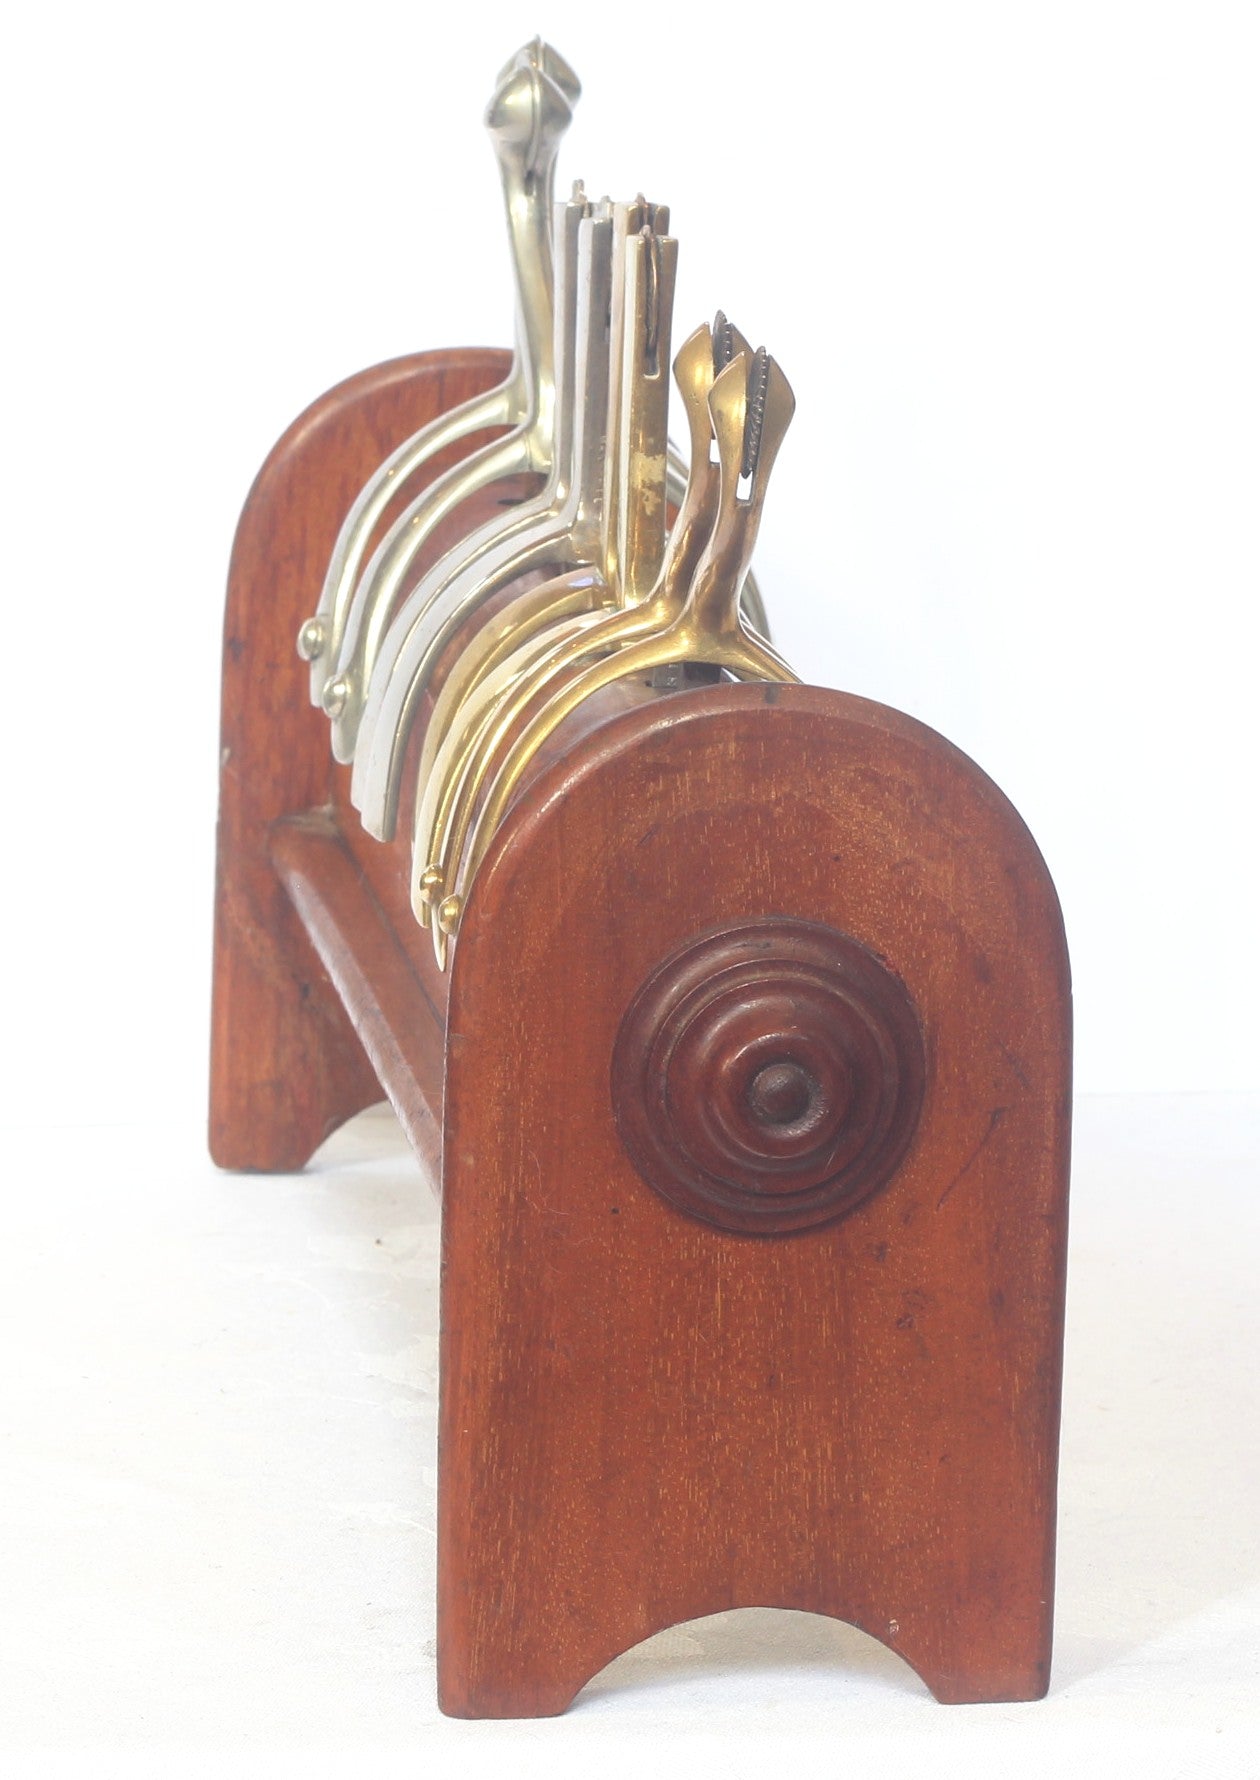 Mahogany Stand or Rack for Officers Mess Dress Box Spurs